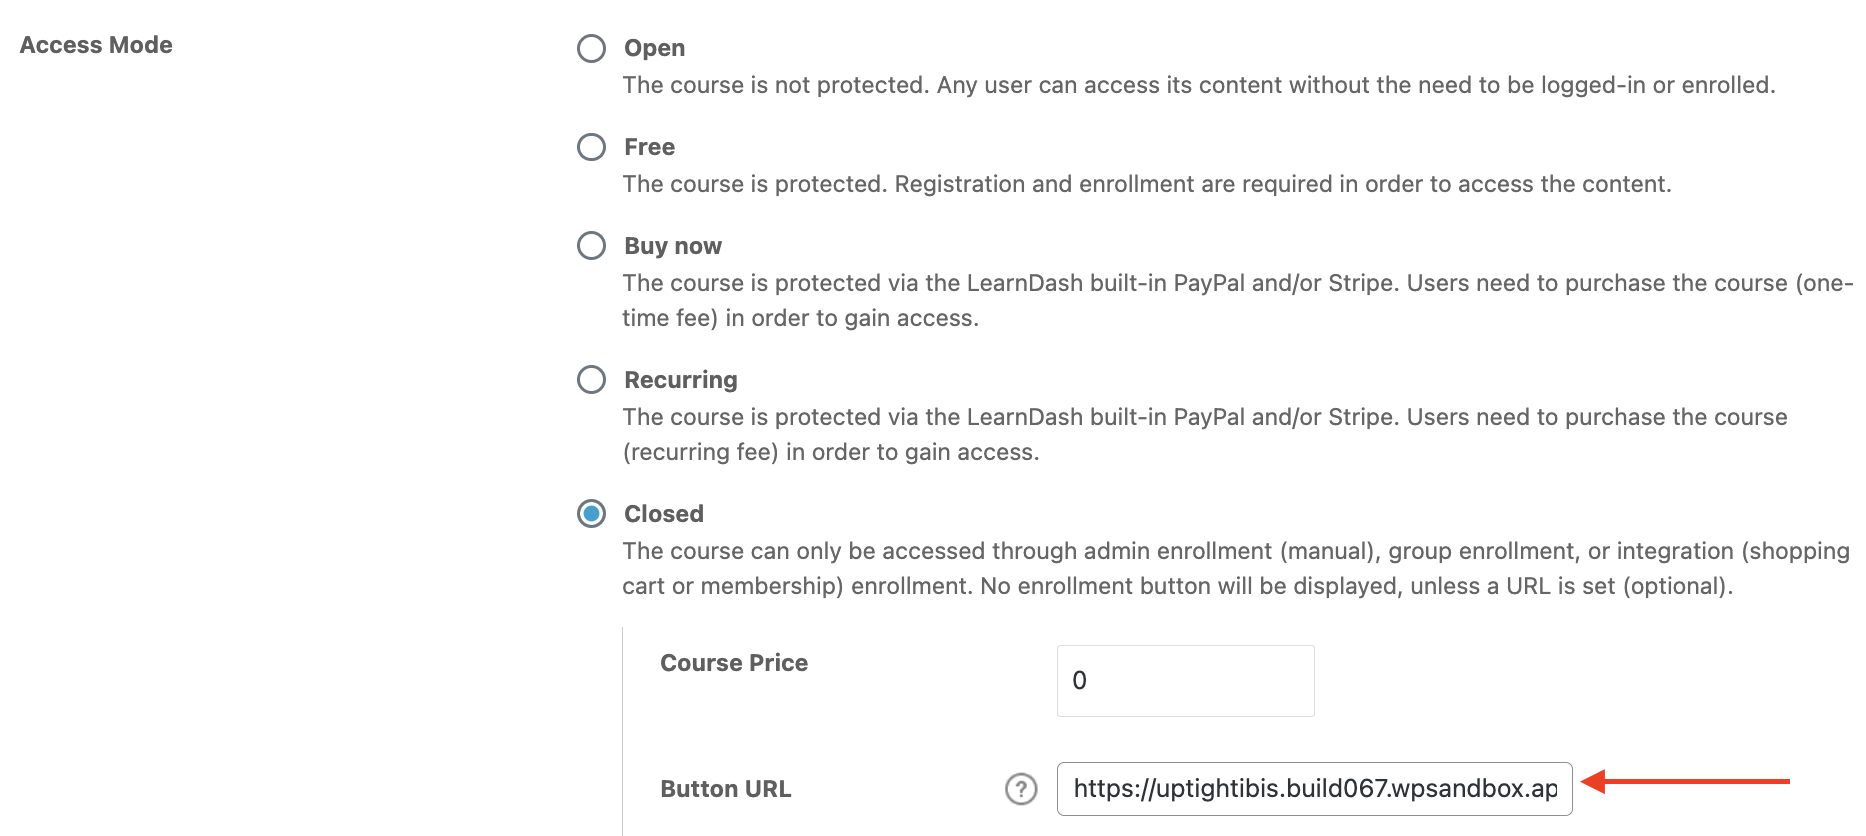 Add button URL to LearnDash course page